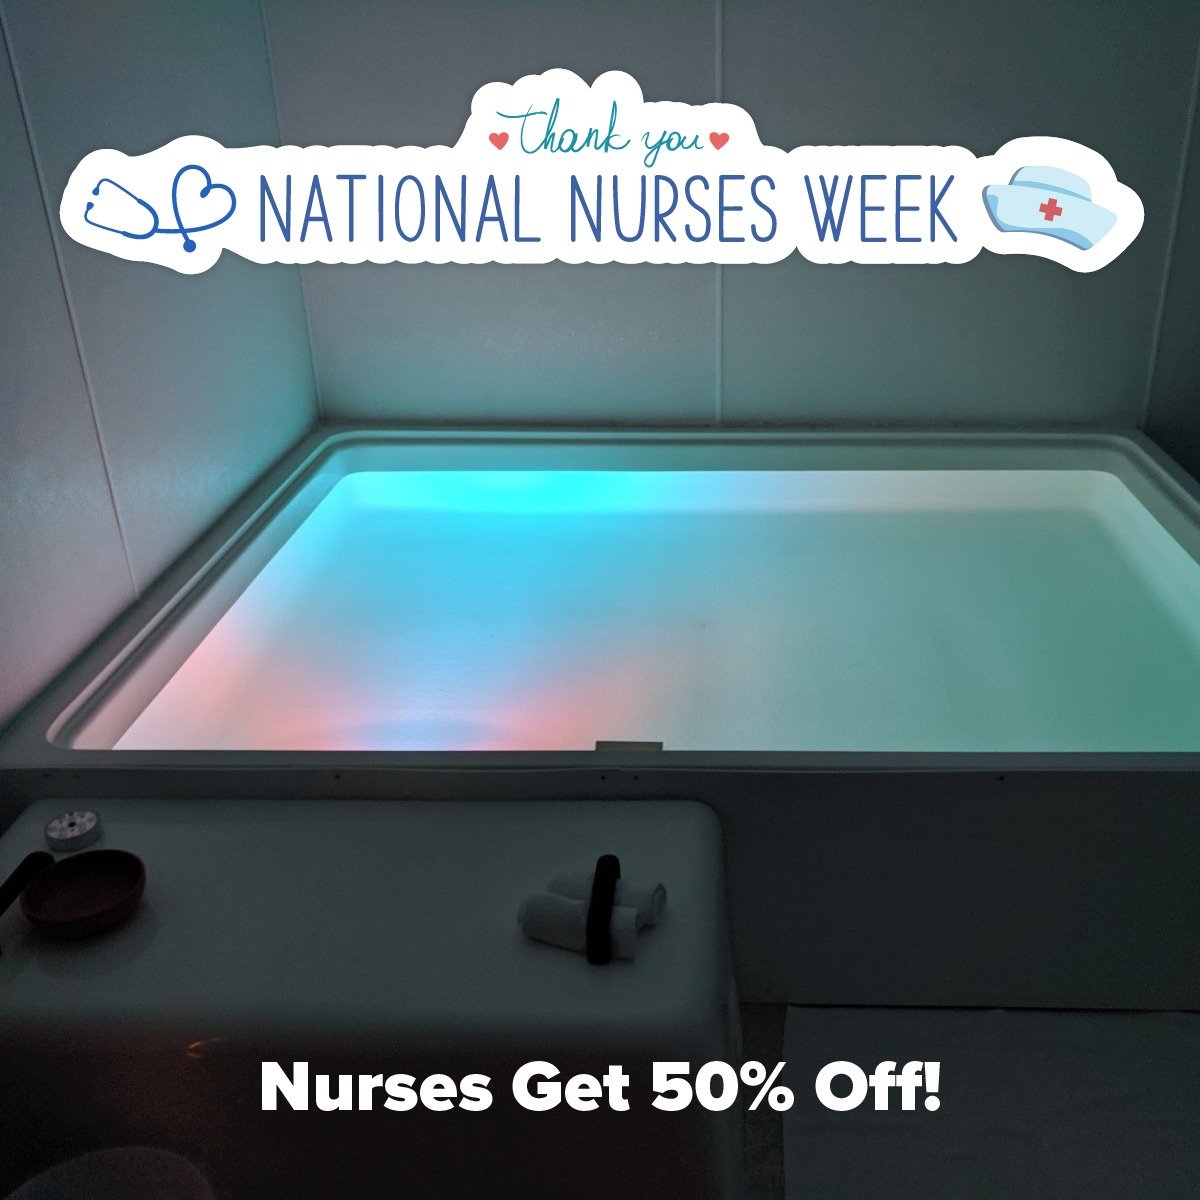 We are thrilled to offer all nurses a 50% discount on all float and salt therapy sessions booked between May 6th and May 12th.  Book in advance. 

Bodymind Float Center would like to extend our gratitude for the dedication and care you provide every 